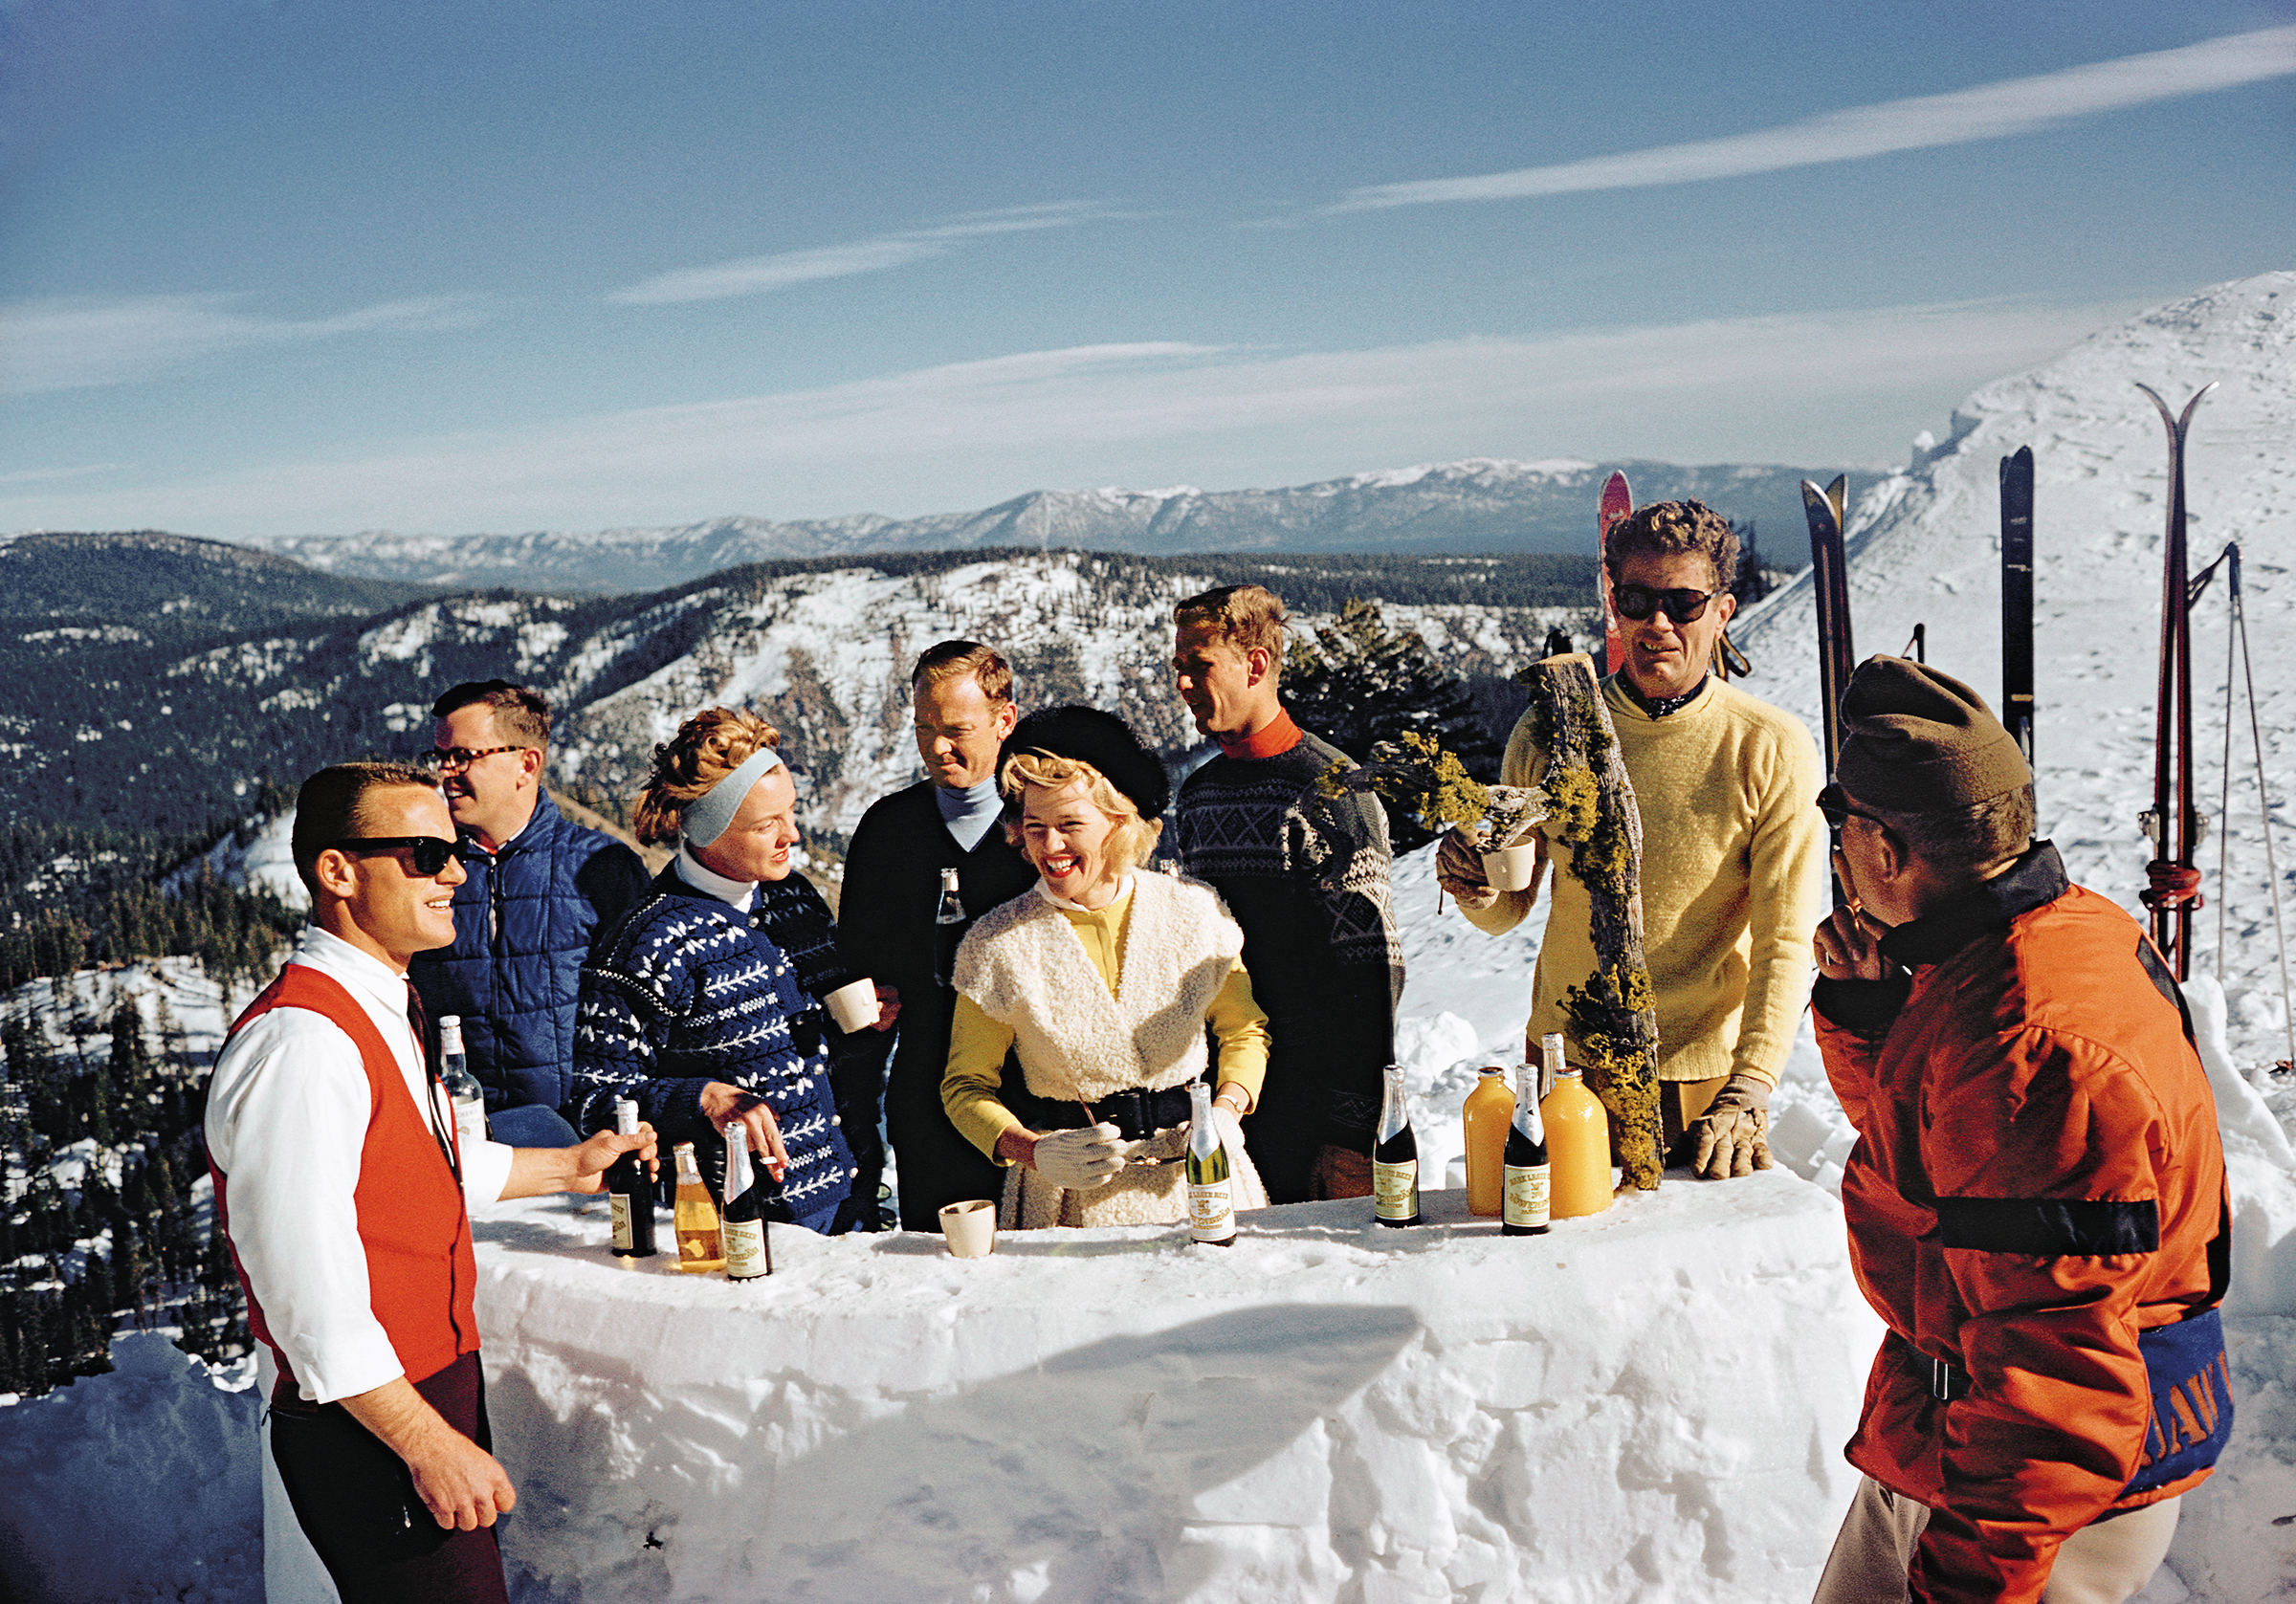 Skiers celebrating with a little après-ski atop a snowy mountain, captured by photographer Slim Aarons.